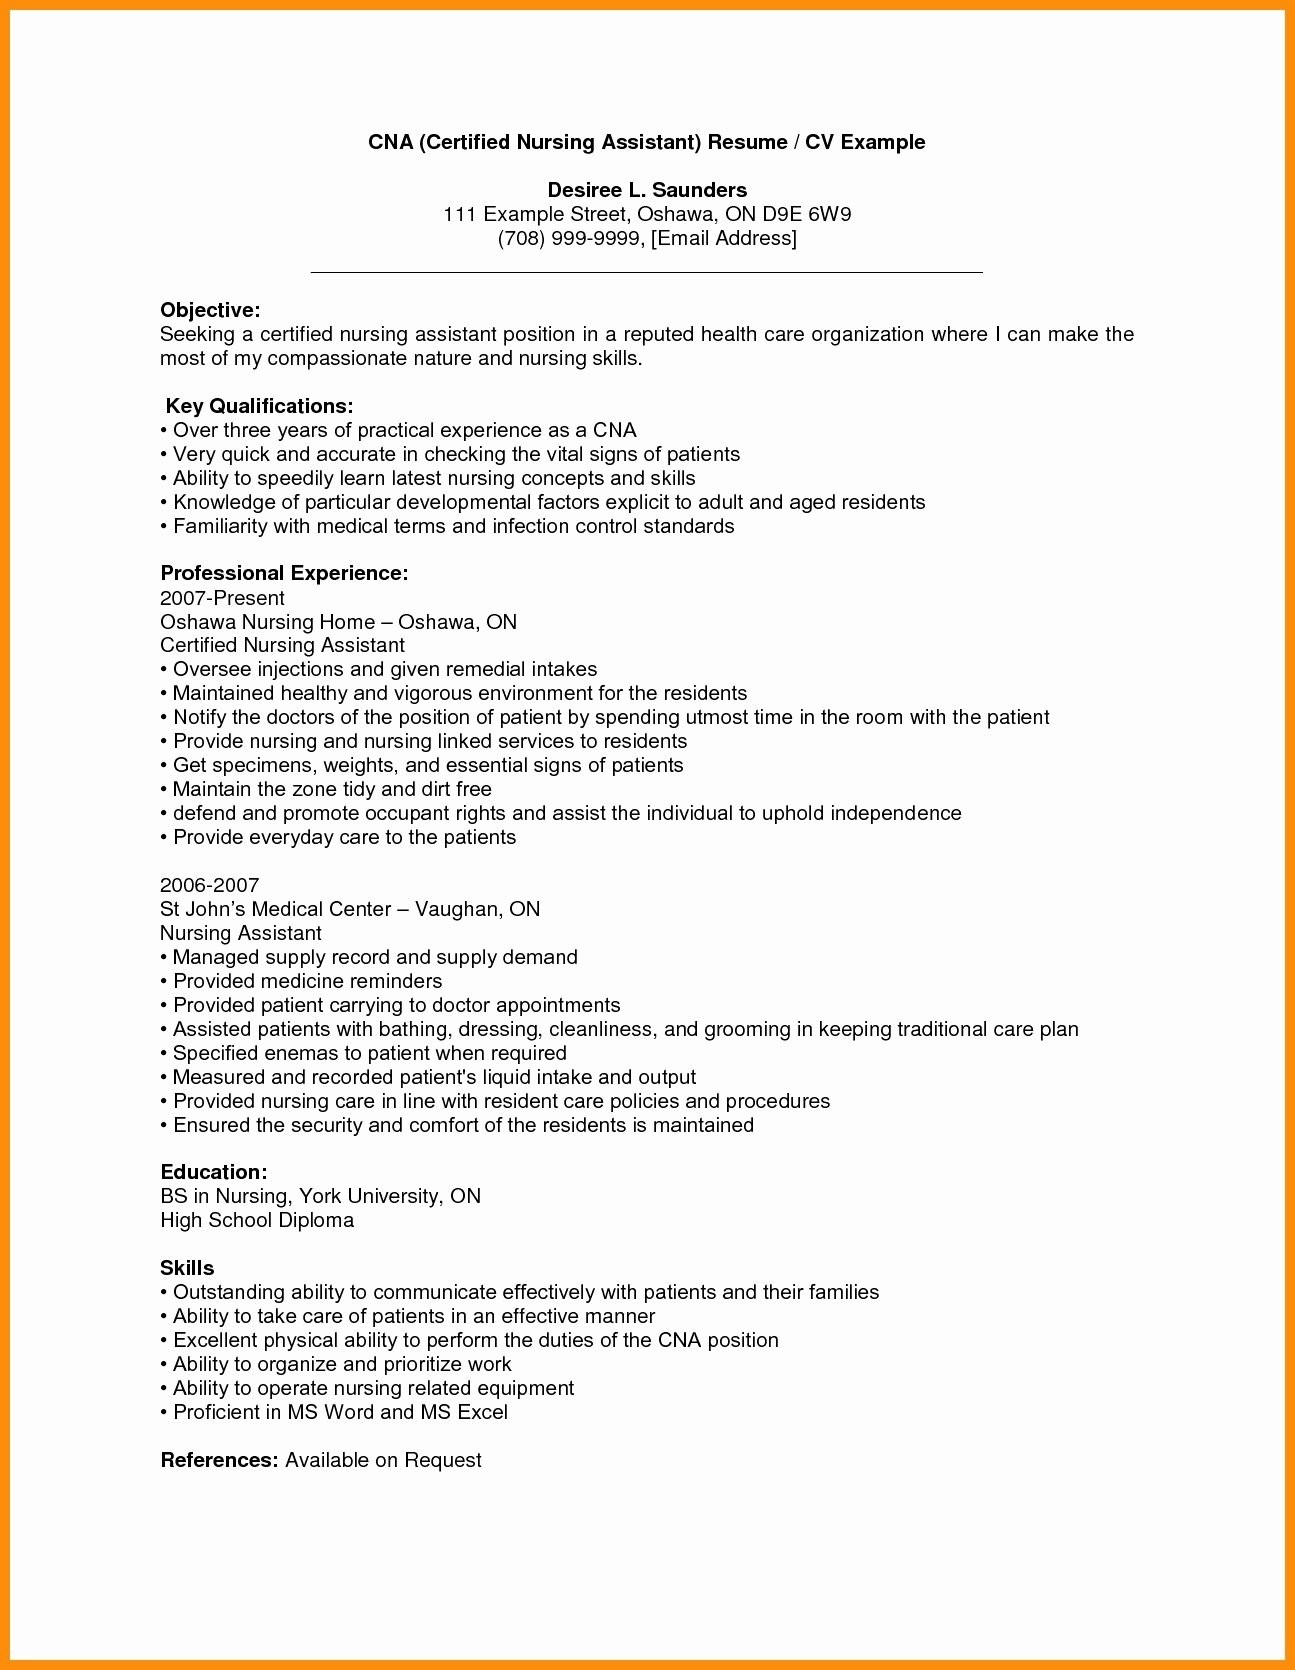 Traditional Cover Letter Template - Chemotherapy order Templates